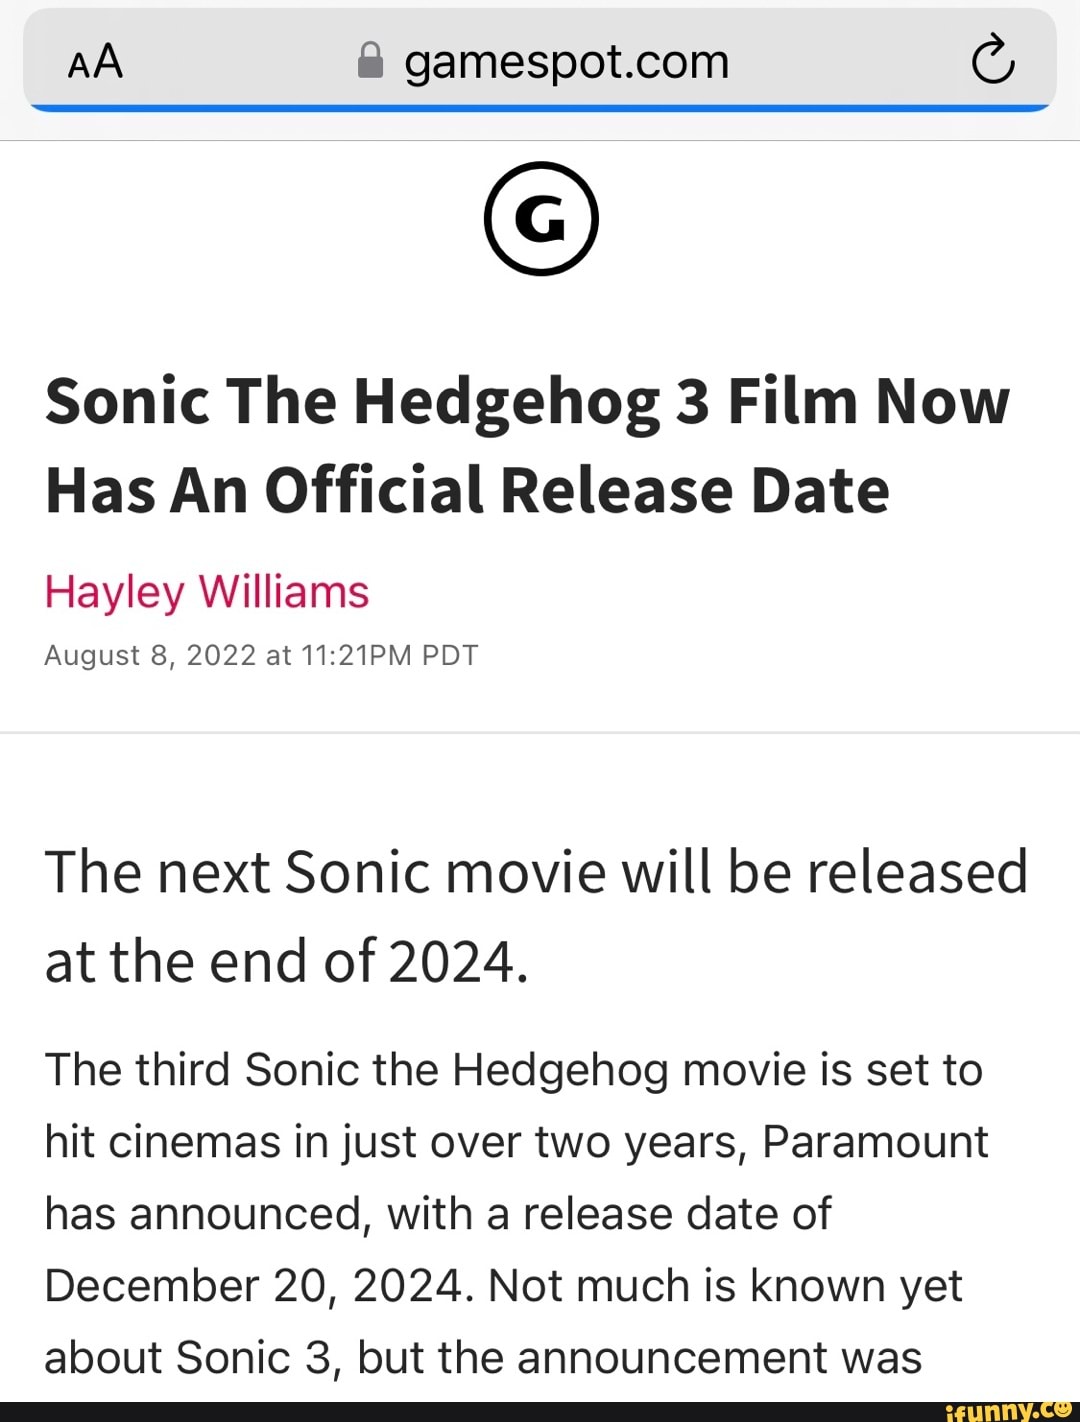 Sonic The Hedgehog 3 Film Now Has An Official Release Date - GameSpot